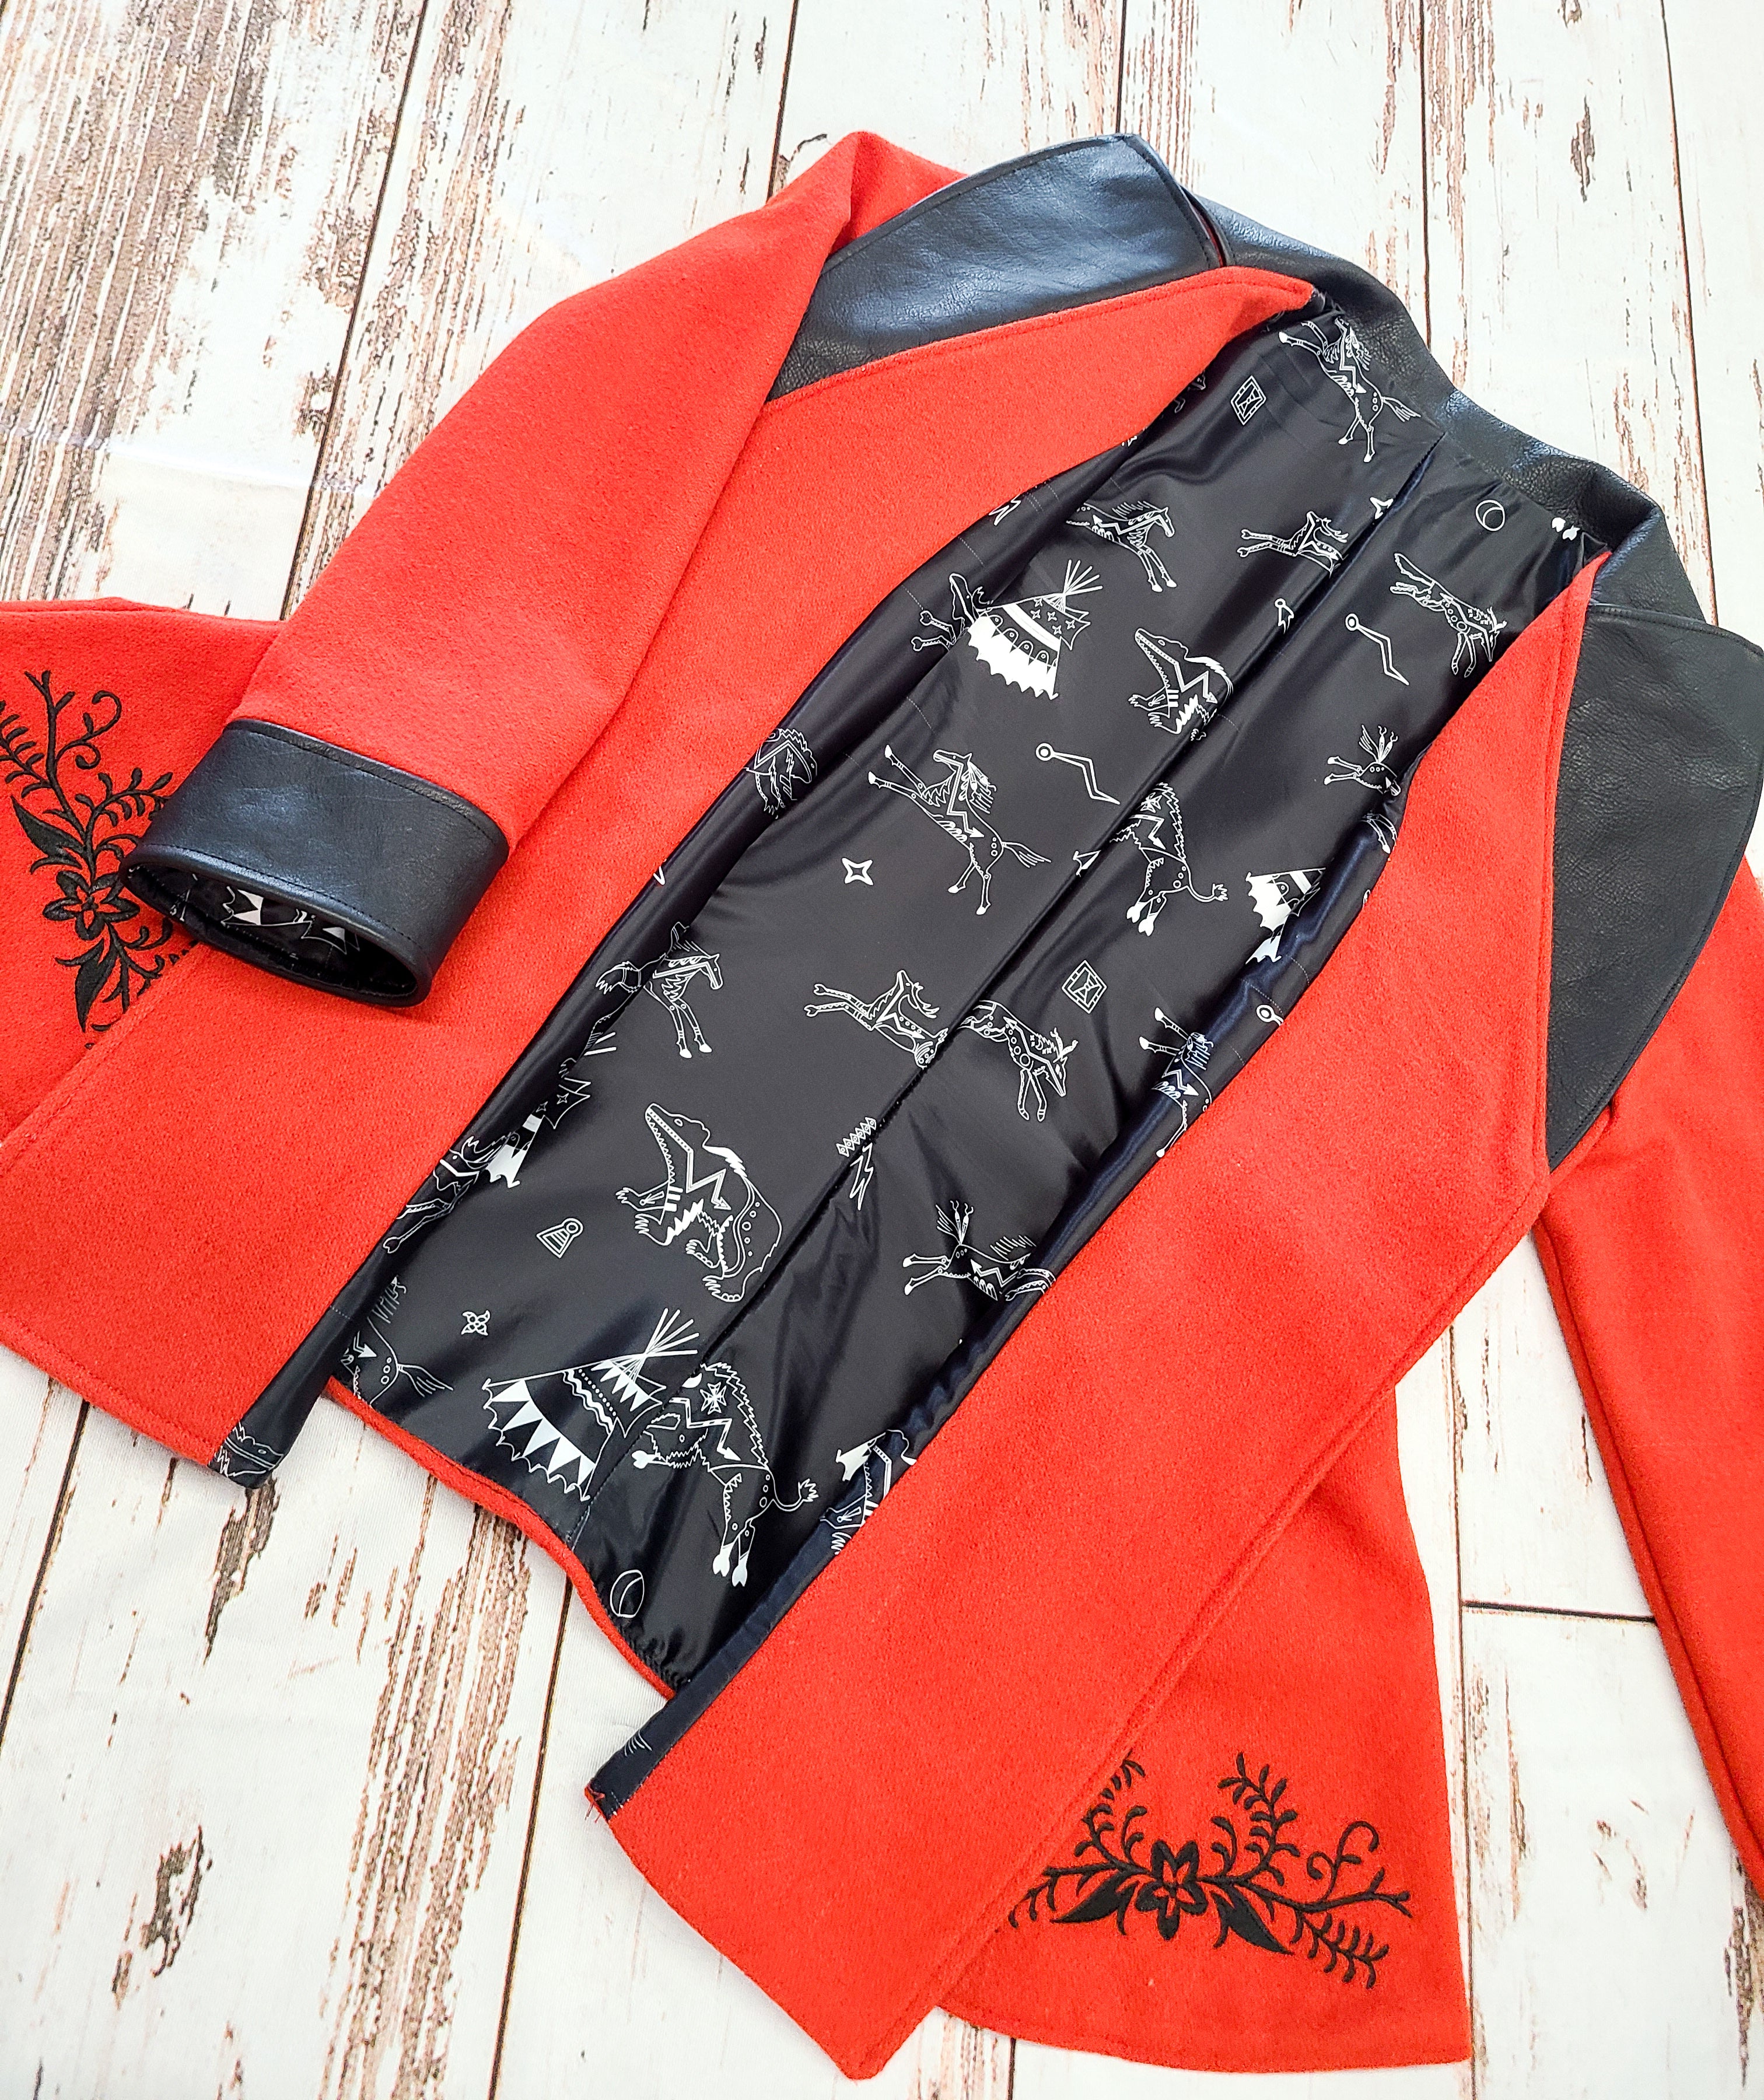 Handmade Red Wool Coat w/ Floral Design and Leather Accents